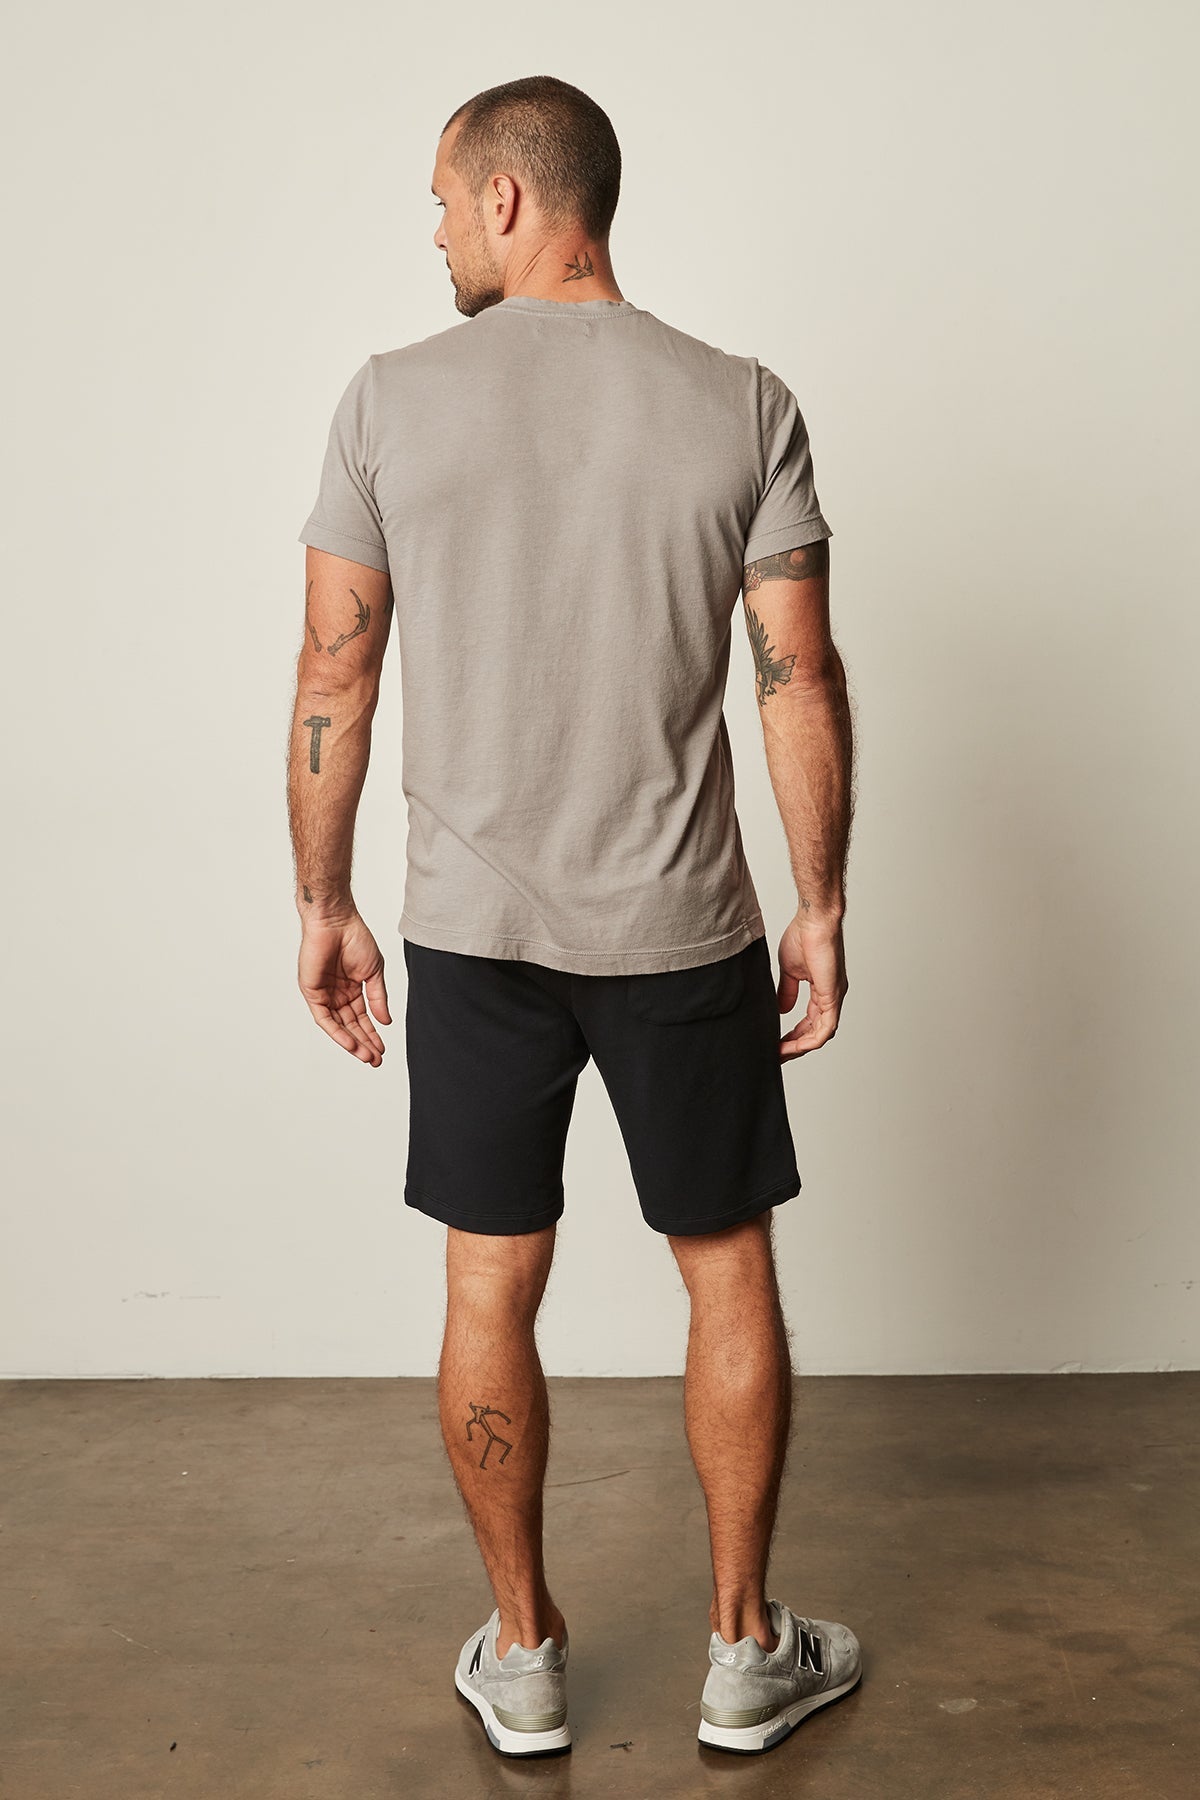   The back view of a man wearing a Velvet by Graham & Spencer lightweight cotton knit grey HOWARD WHISPER CLASSIC CREW NECK TEE and black shorts. 